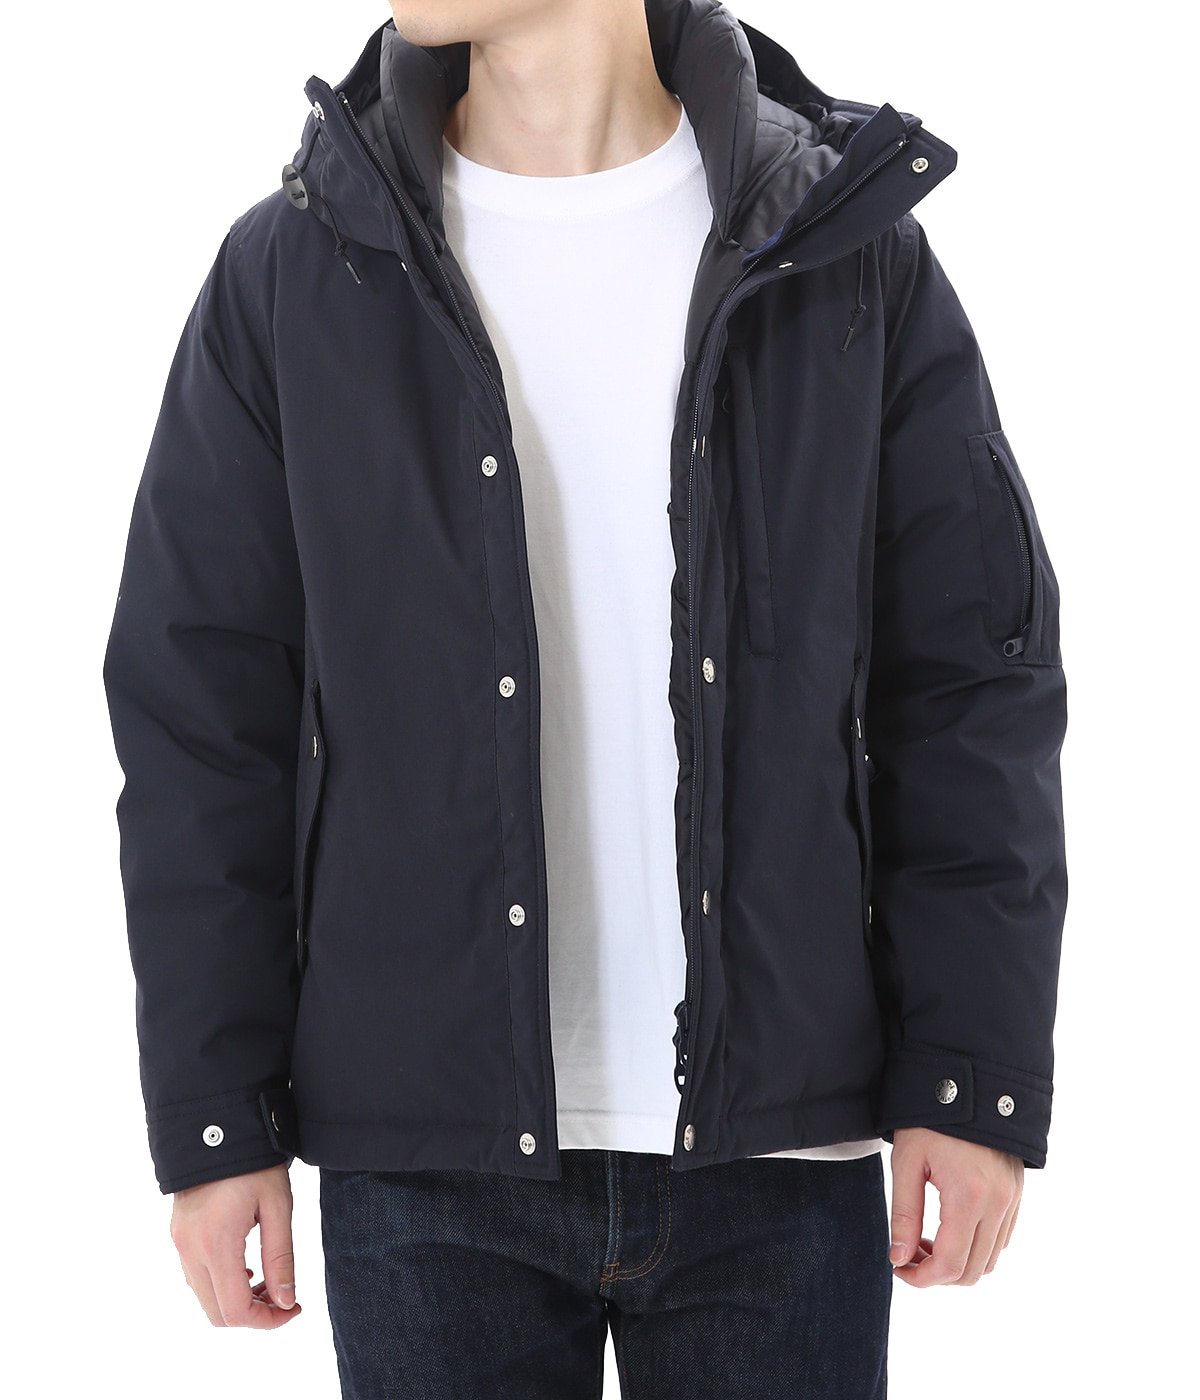 65 35 Mountain Short Down Parka S ダークネイビー 通常商品 通販 Arknets アークネッツ